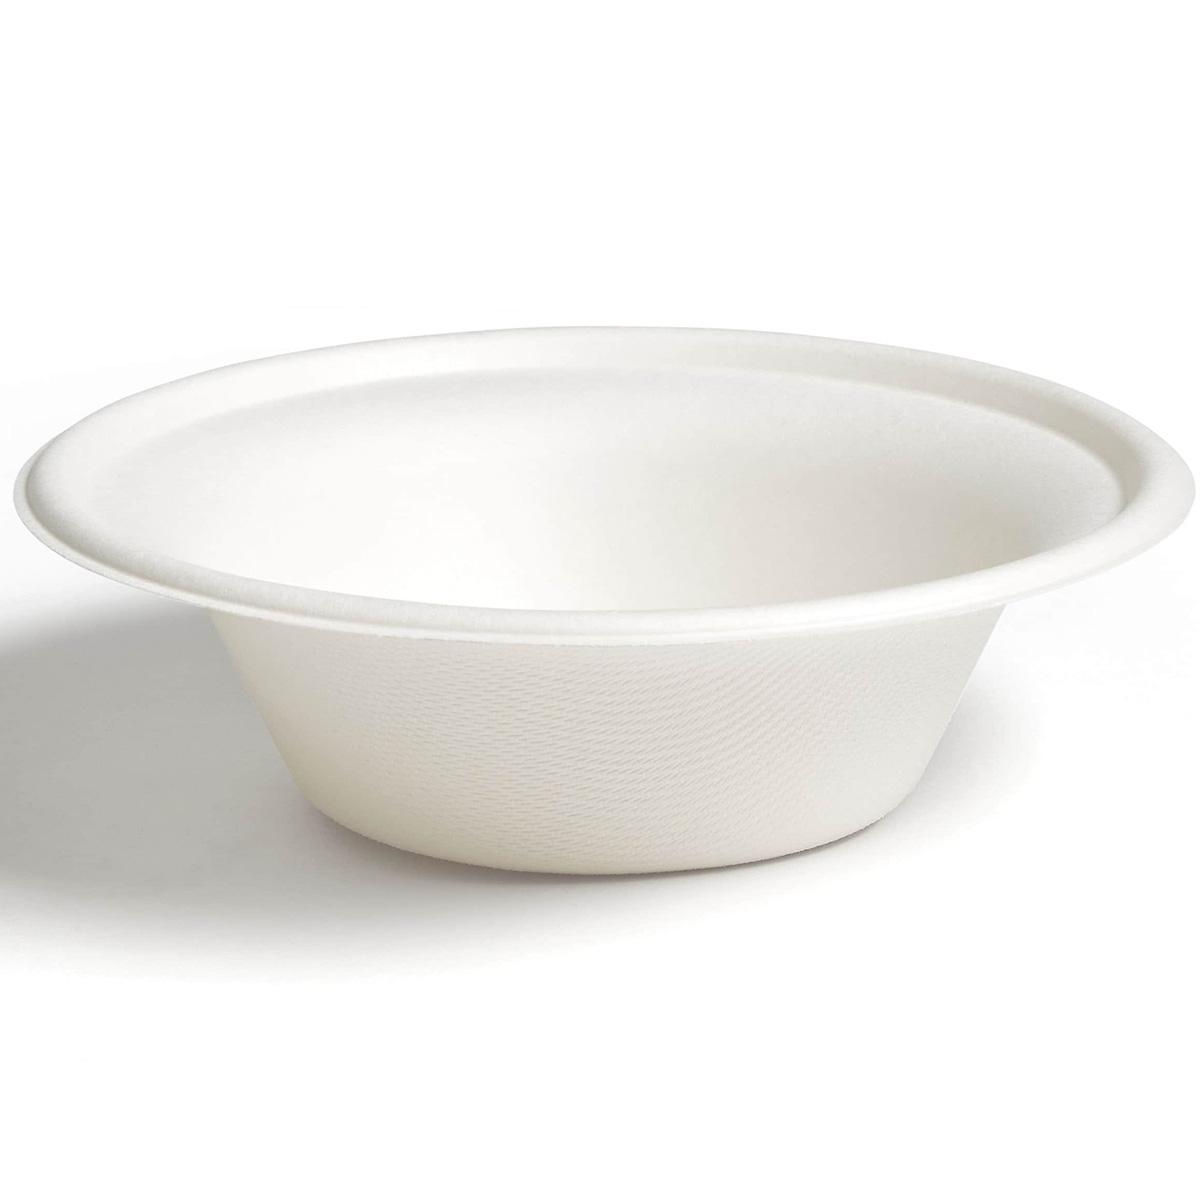 125 Perk Compostable Paper Bowls for $7.99 Shipped